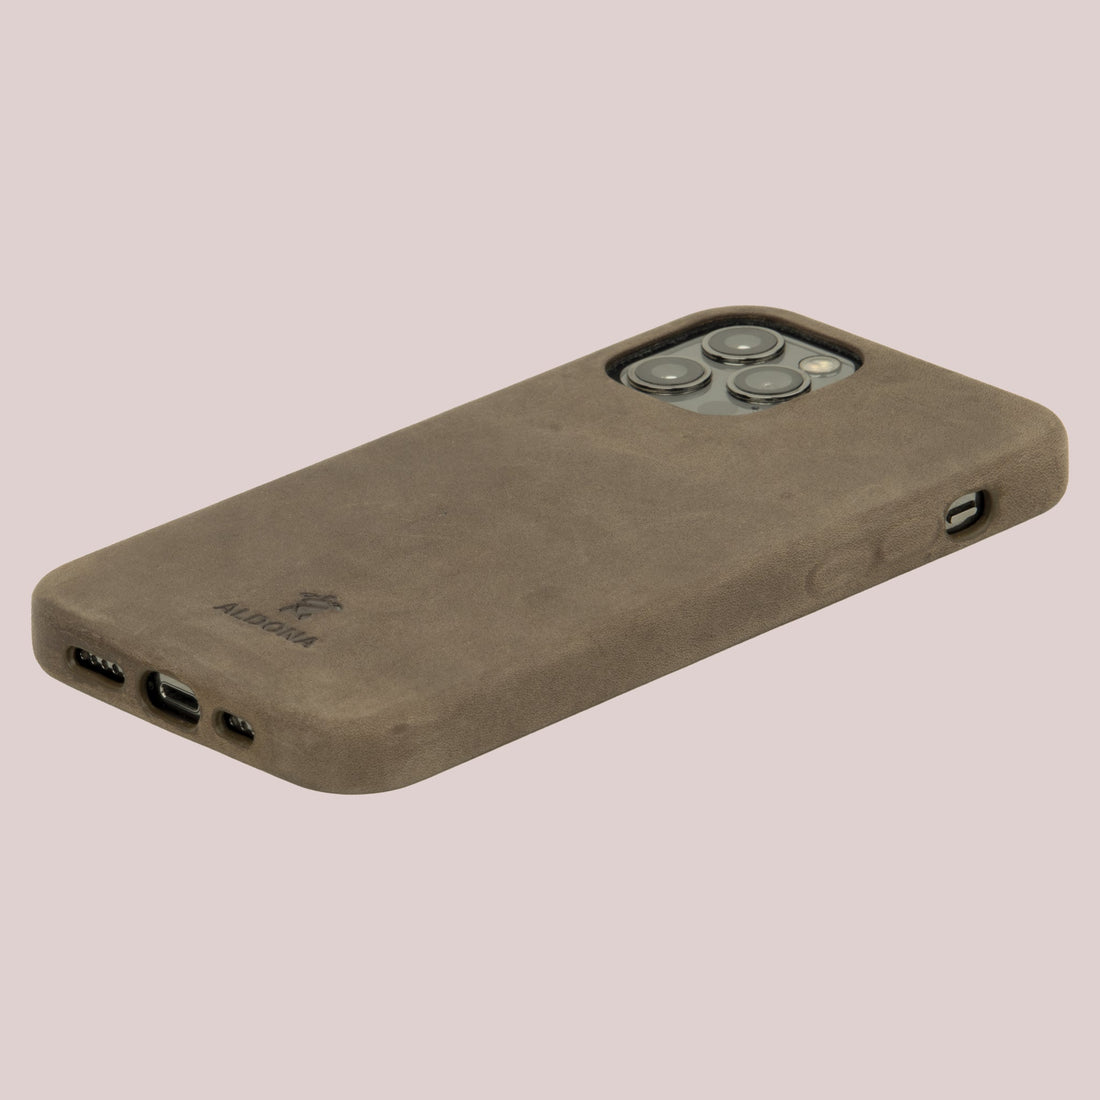 Kalon Case for iPhone 13 Mini with MagSafe Compatibility - Dark Soil